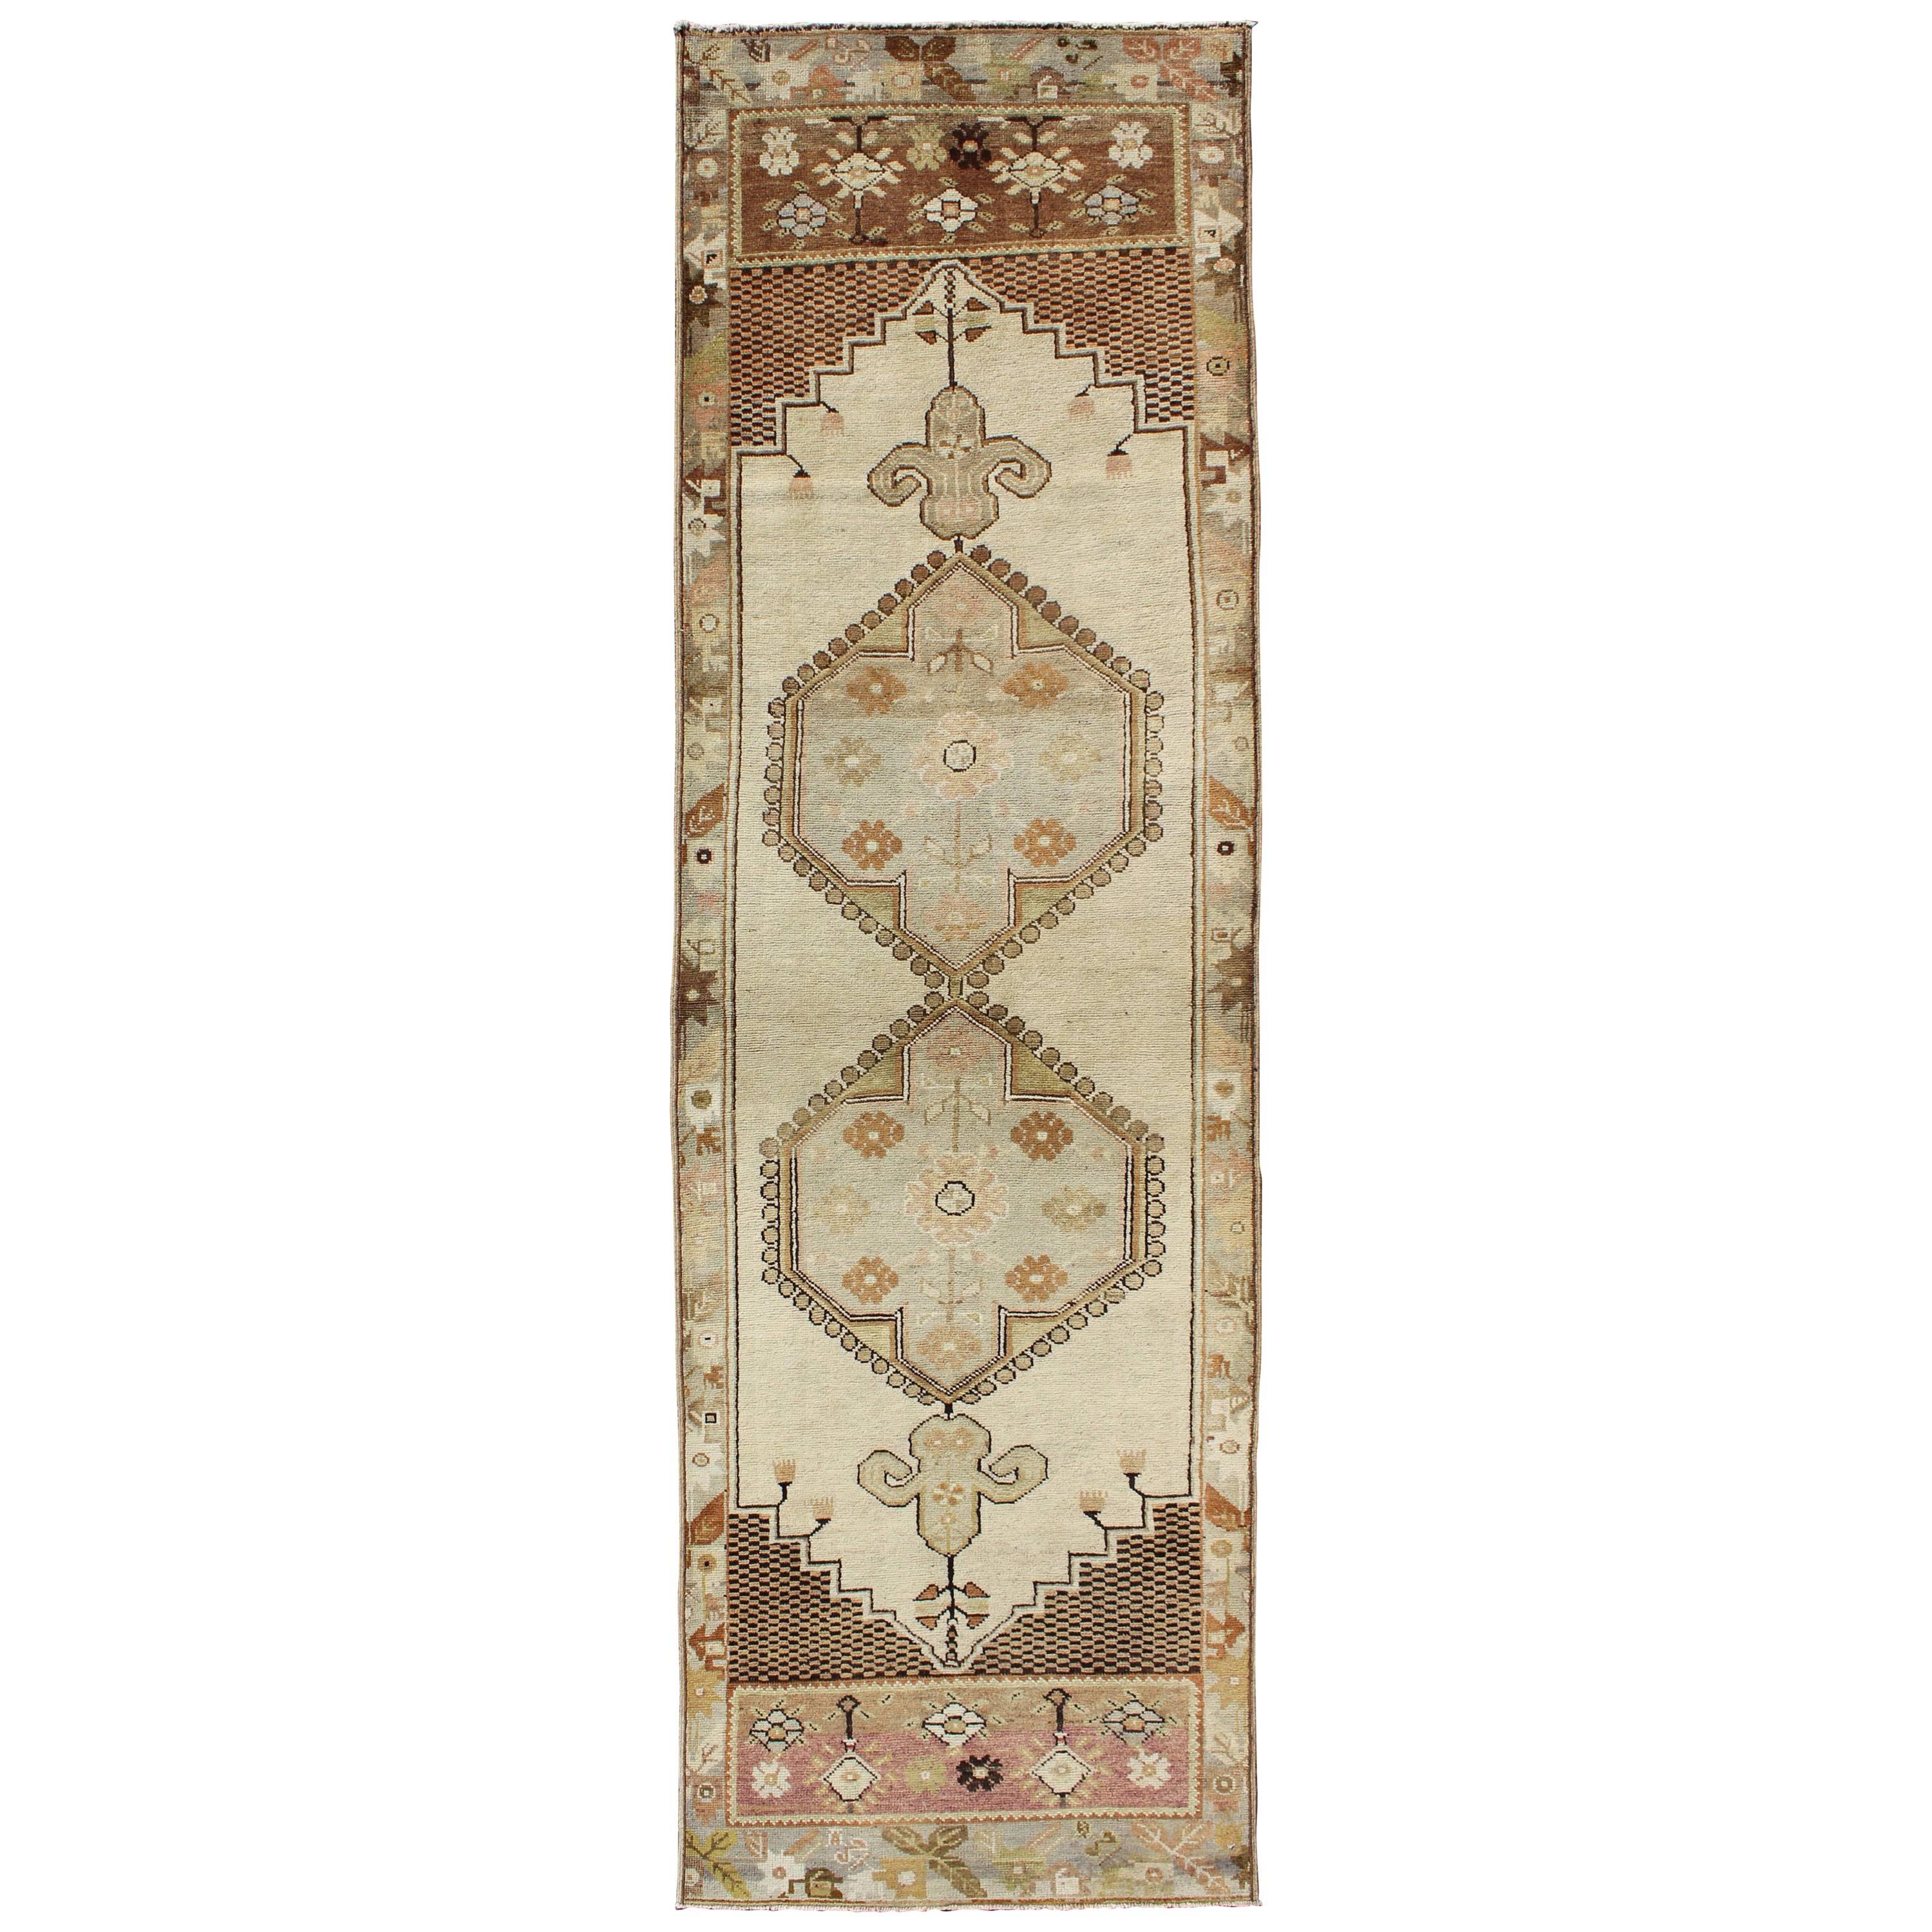 Regal Vintage Turkish Oushak Rug with Dual Medallion Design in Nude and Brown